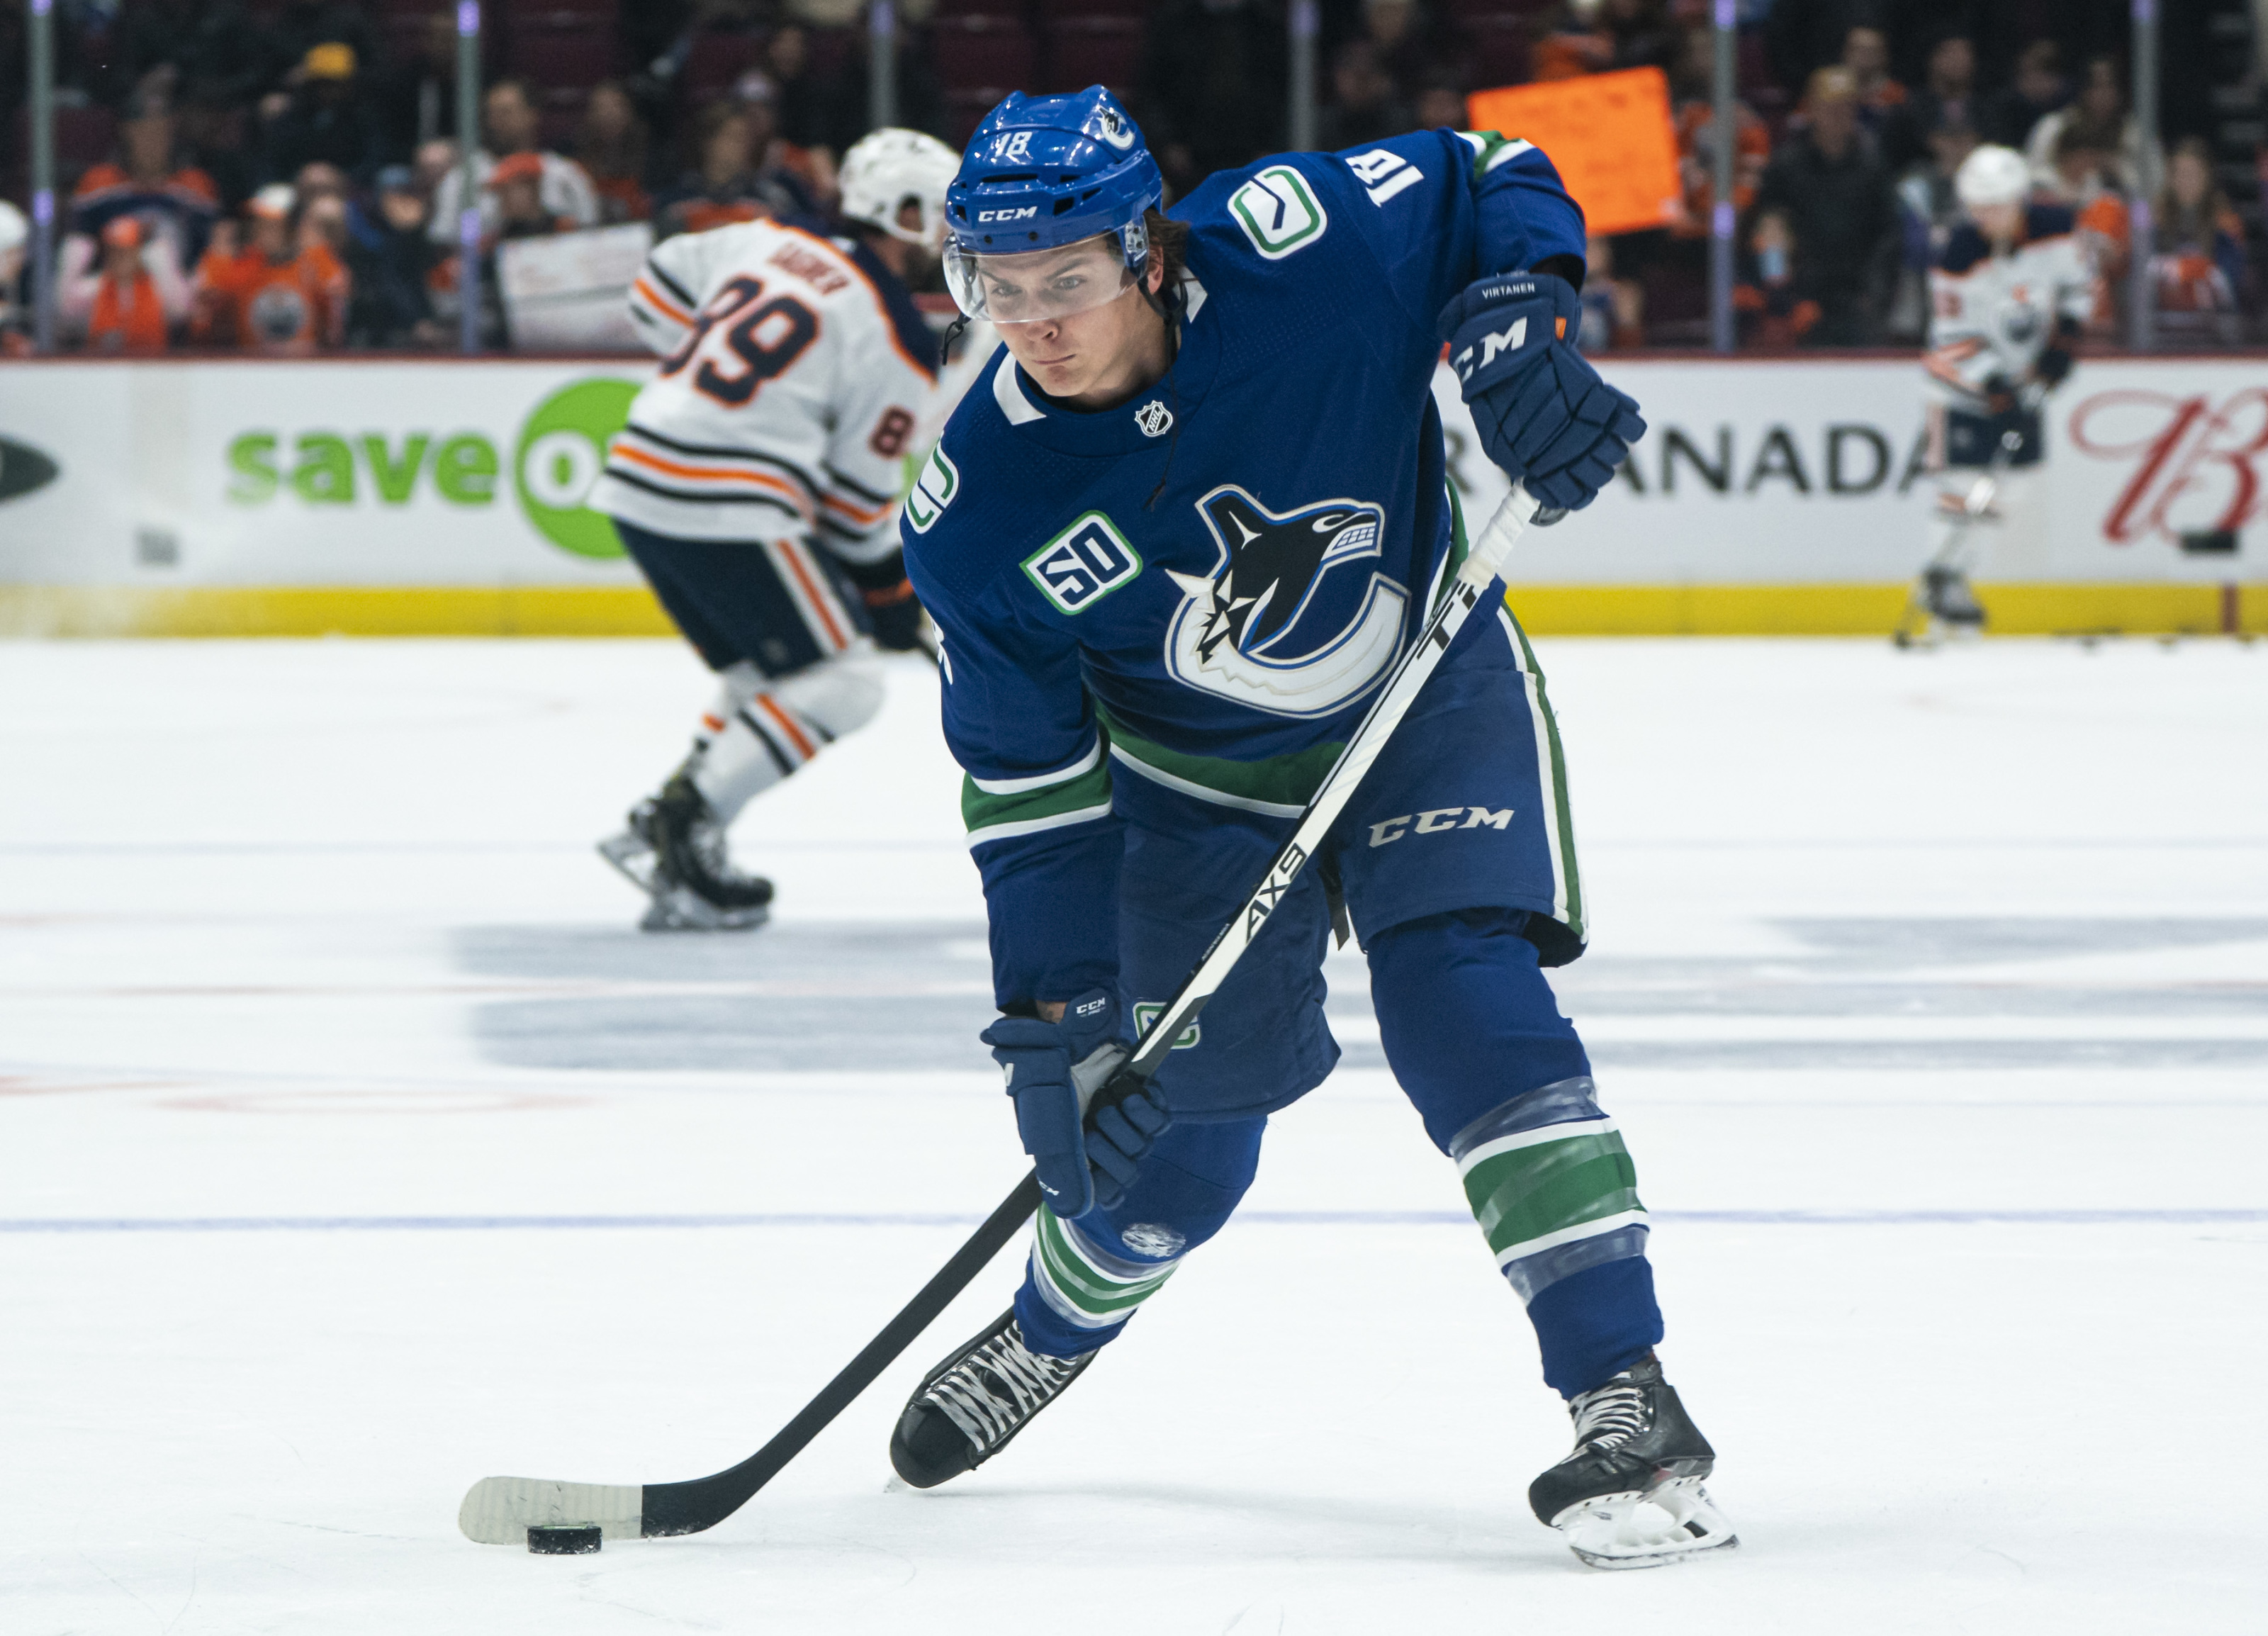 Vancouver Canucks right wing Jake Virtanen (18) during the NHL